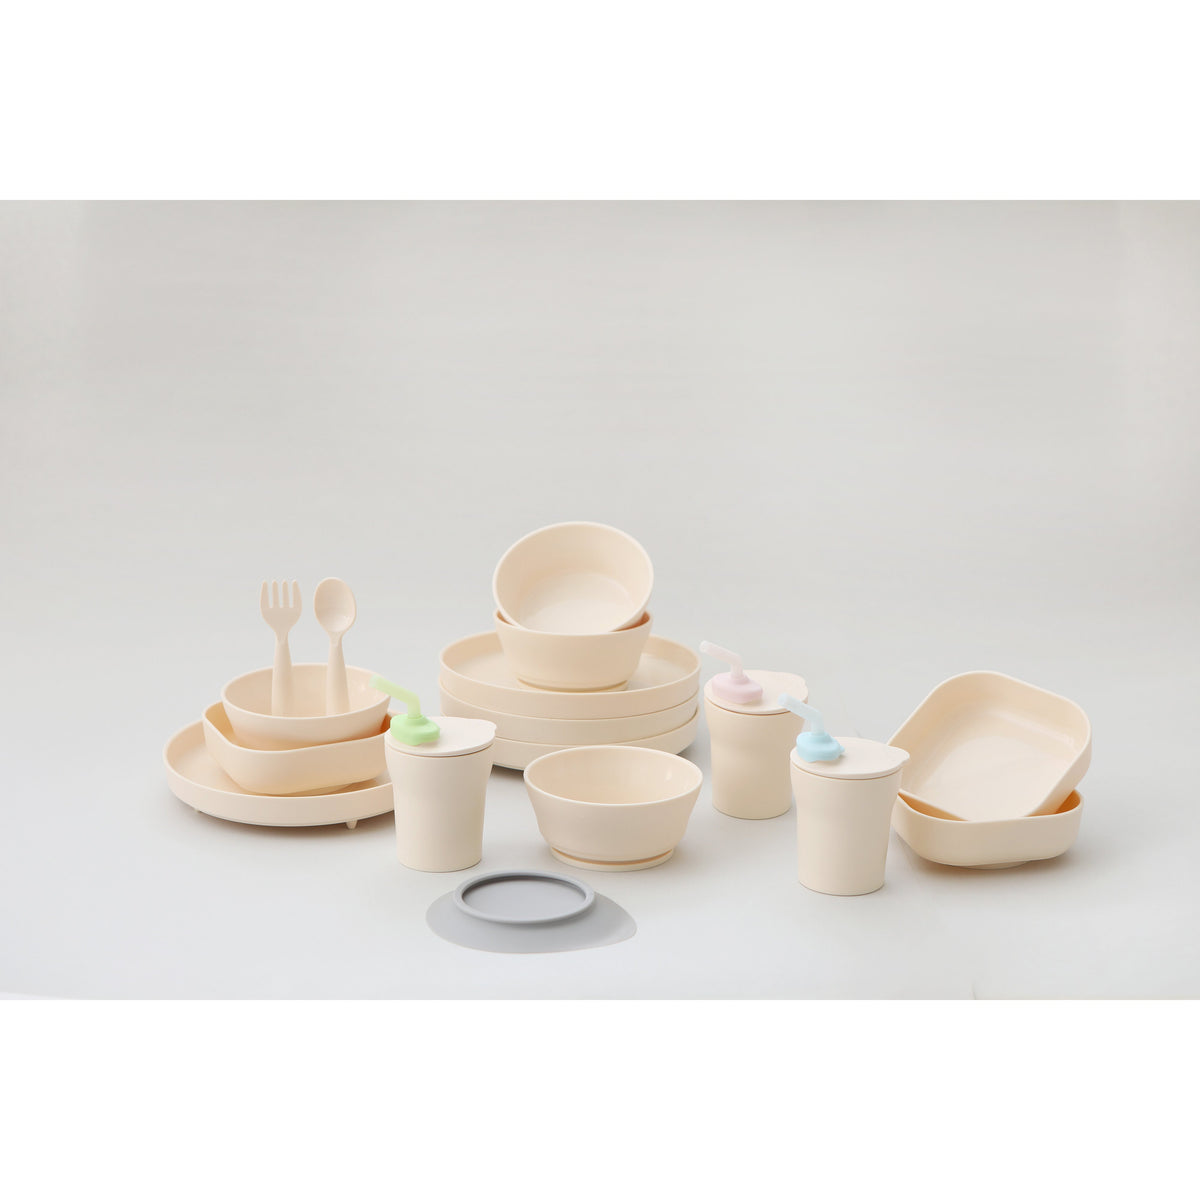 miniware-healthy-meal-set-pla-smart-divider-suction-plate-in-vanilla-+-silicone-divider-in-peach- (12)